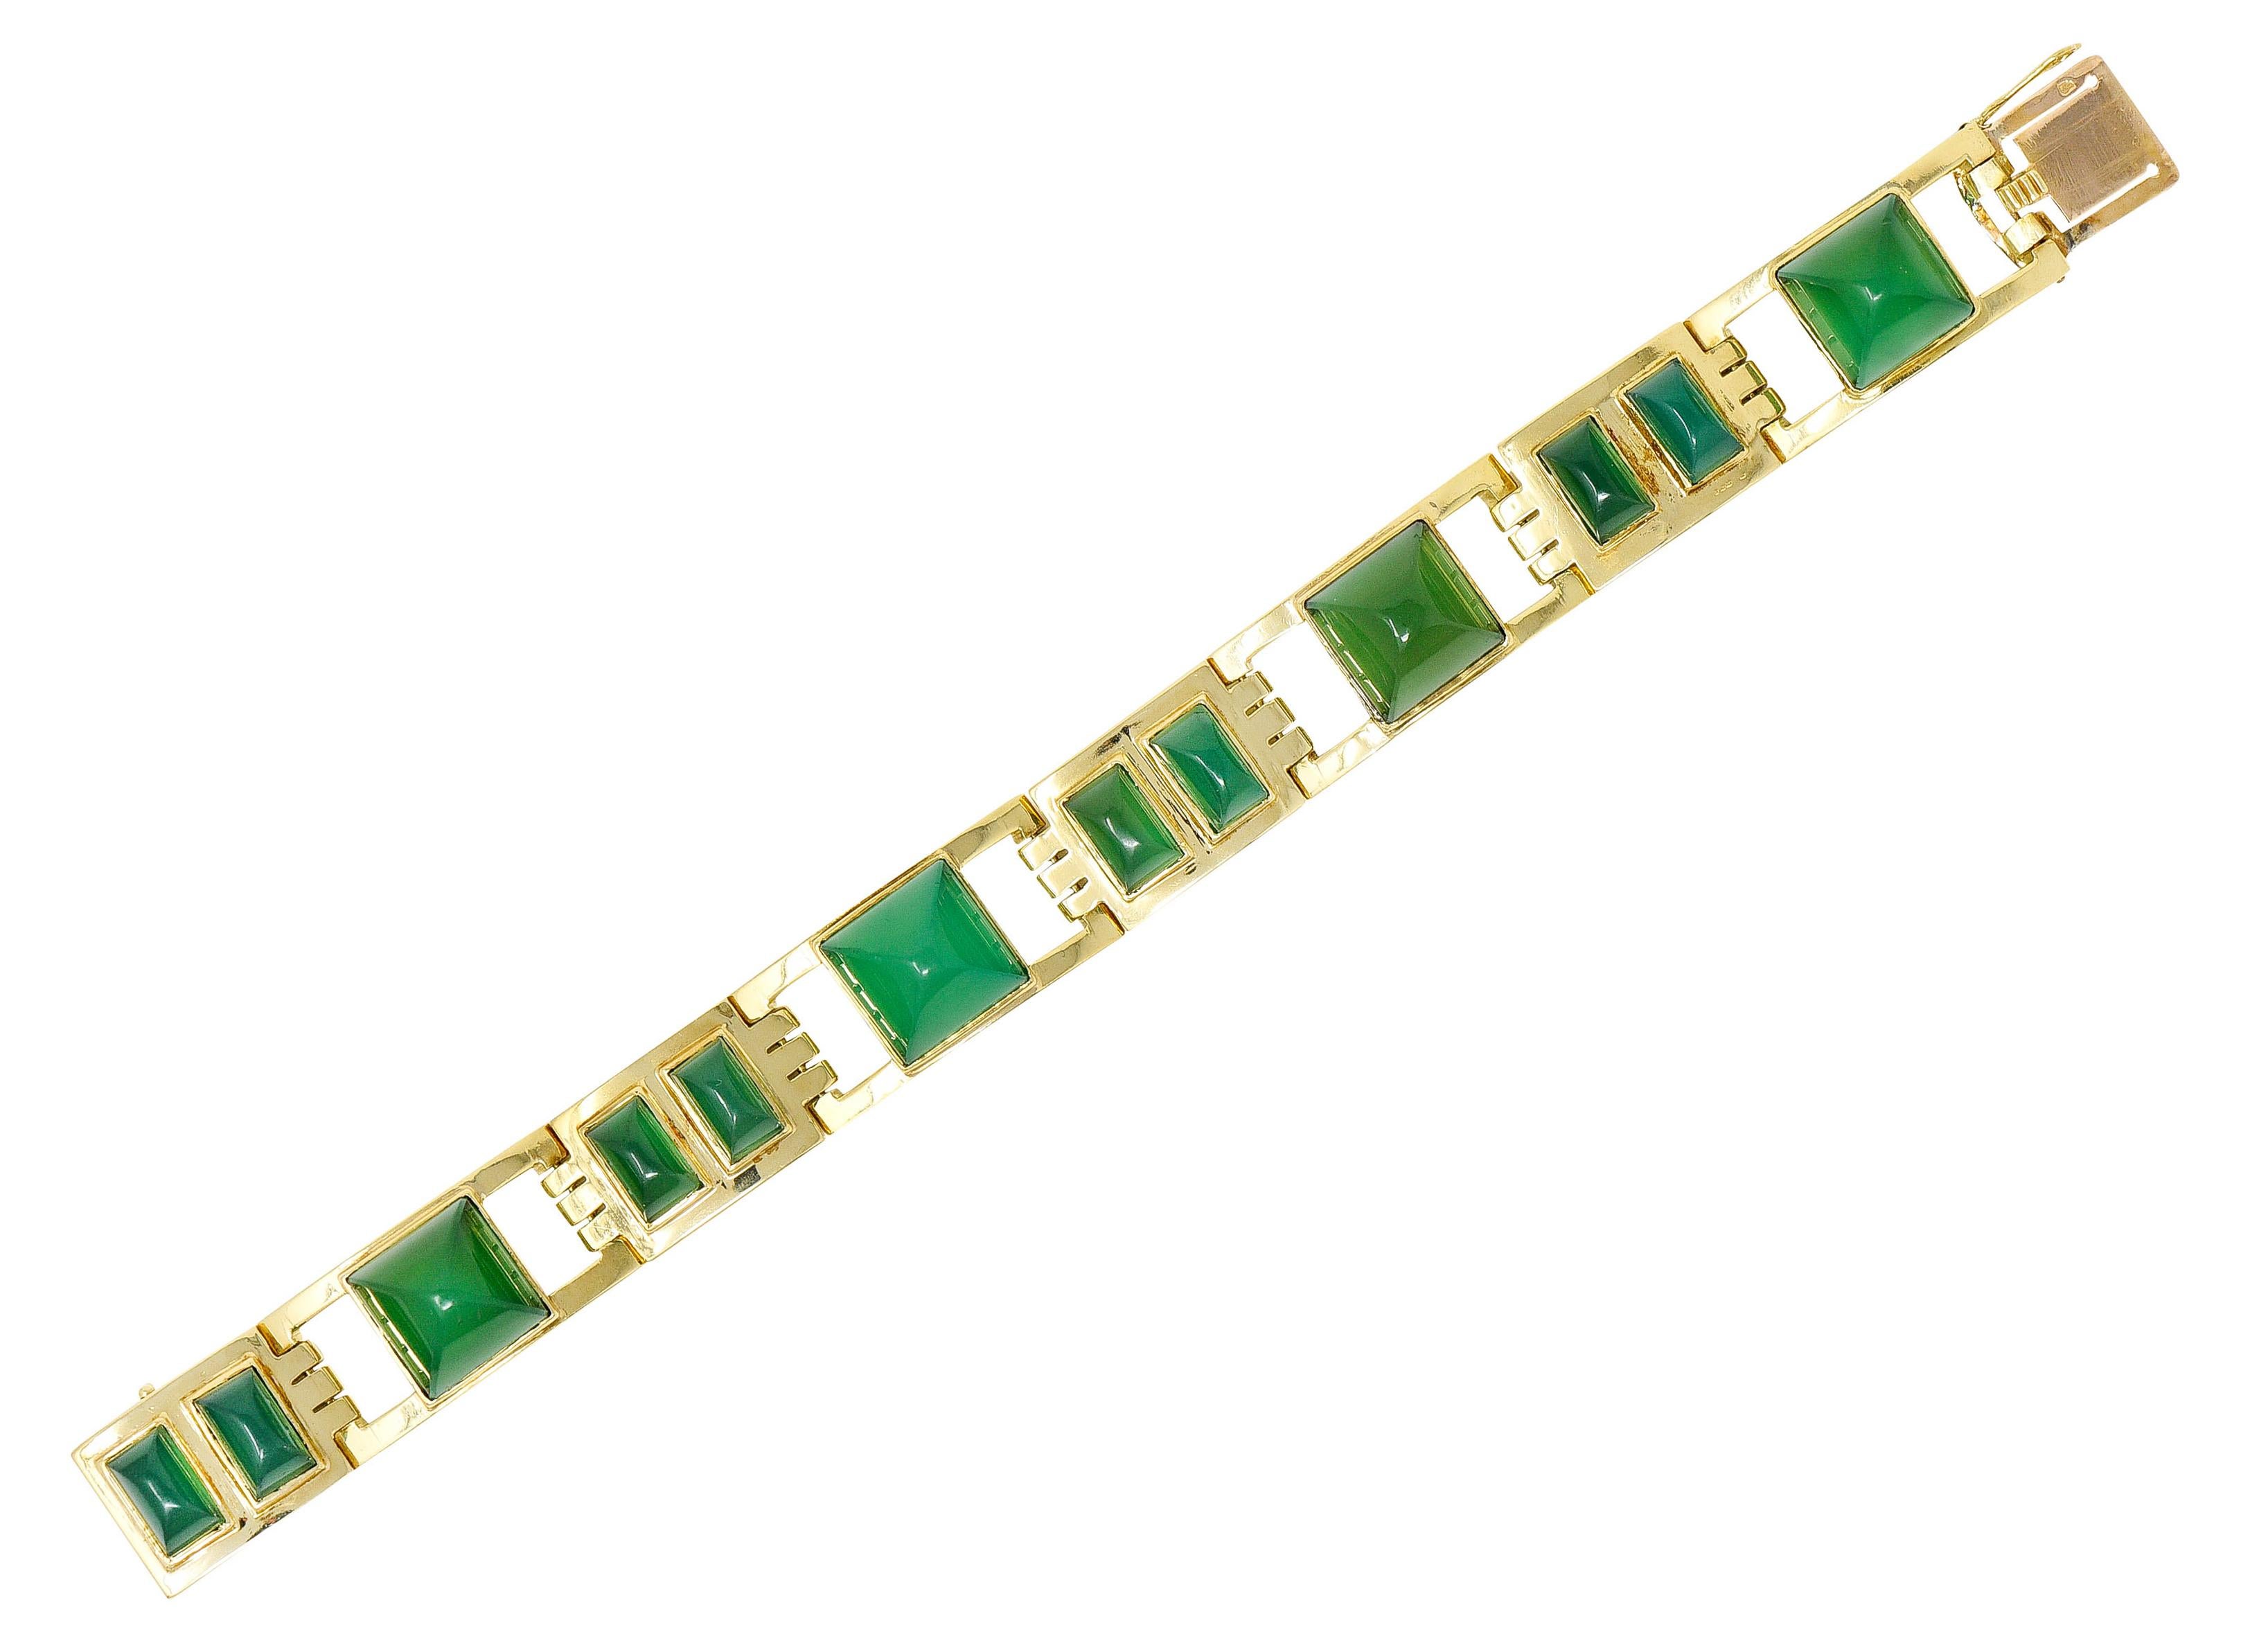 Link bracelet is comprised of arched panels pierced in a geometric design

Featuring large sugarloaf cabochons of chrysoprase alternating with sets of rectangular chrysoprase sugarloaf cabochons

Translucent with vibrant and uniform bluish green to